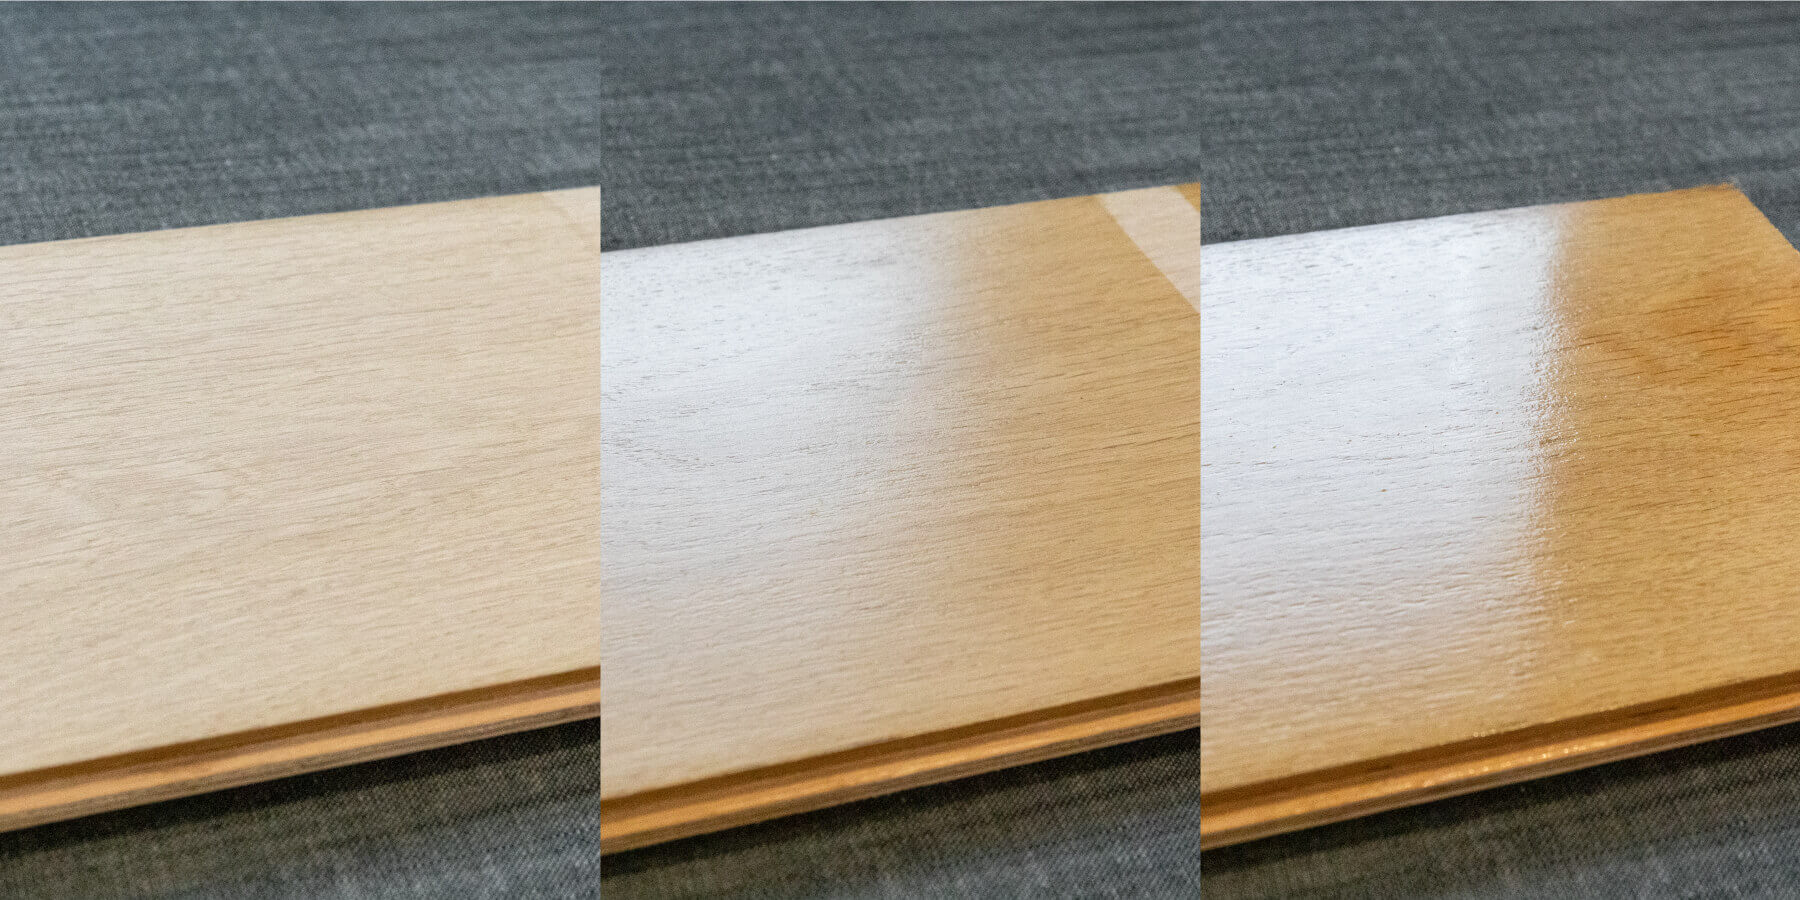 Comparison of the Different Wood Finishes